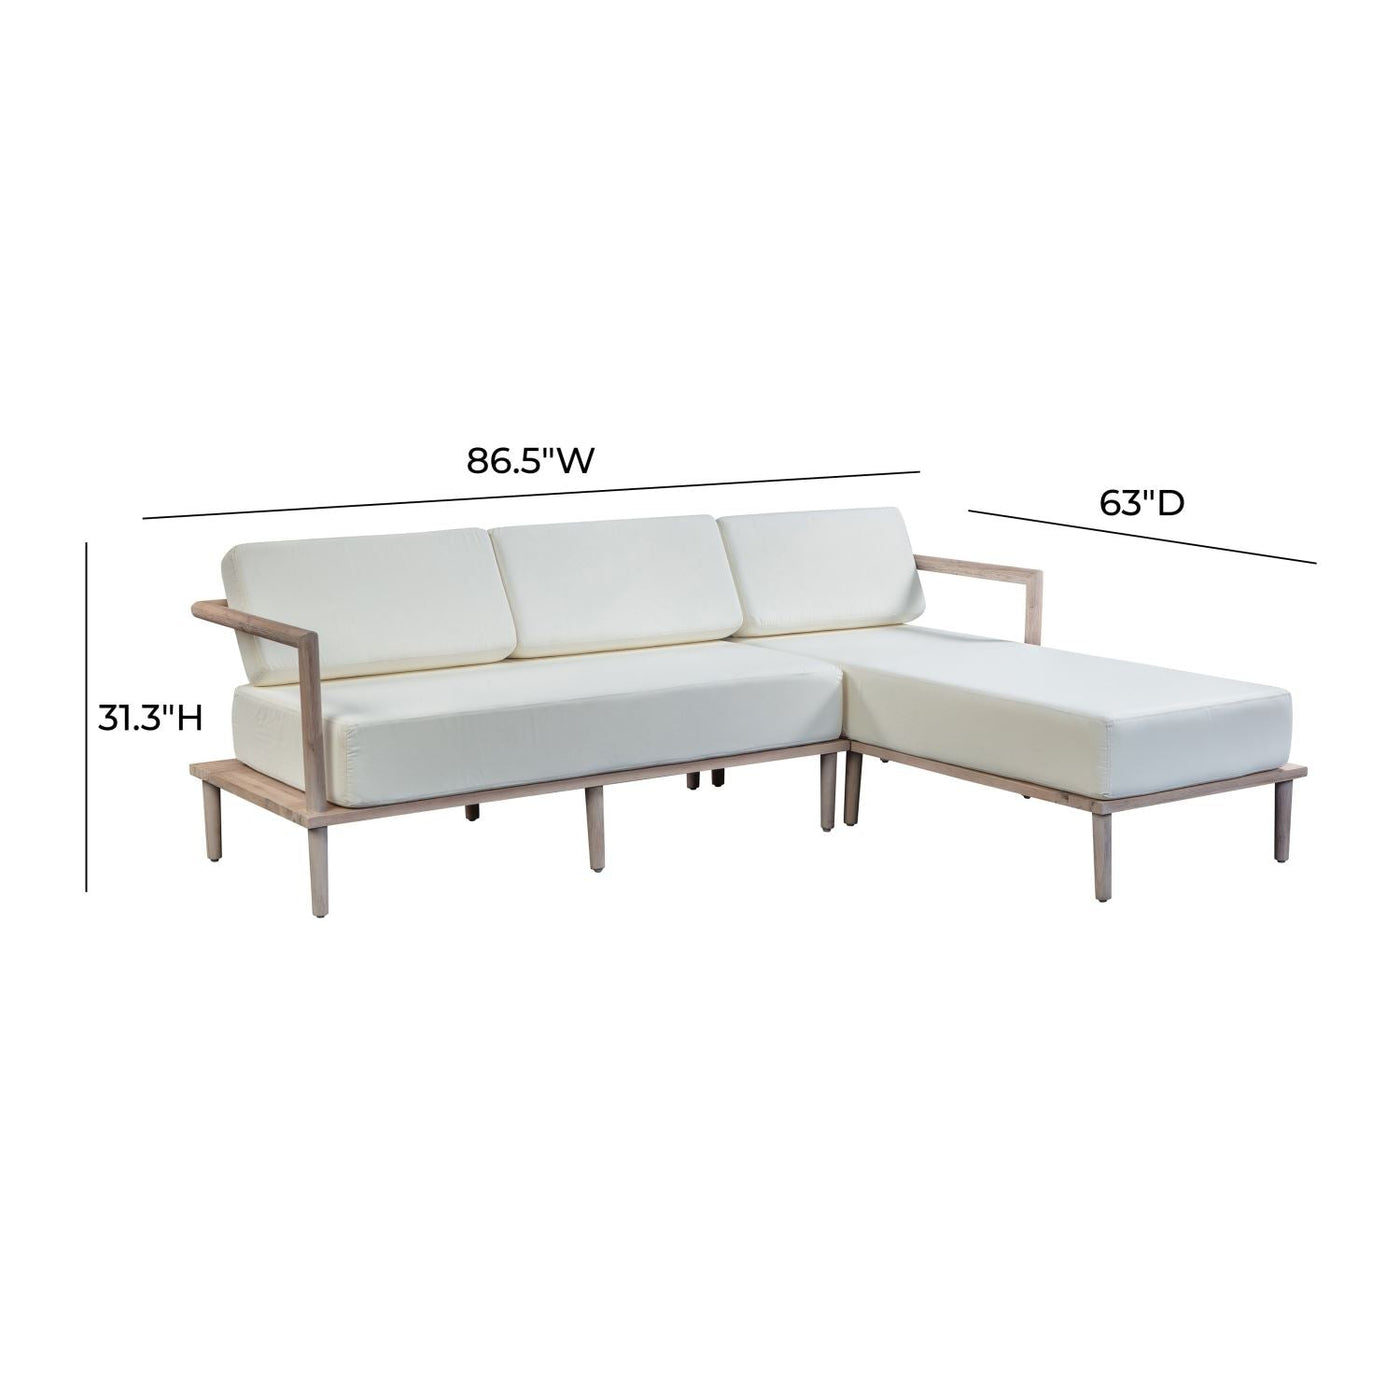 Endless Weekend Right Hand Facing Outdoor Sectional - Cream/Wood